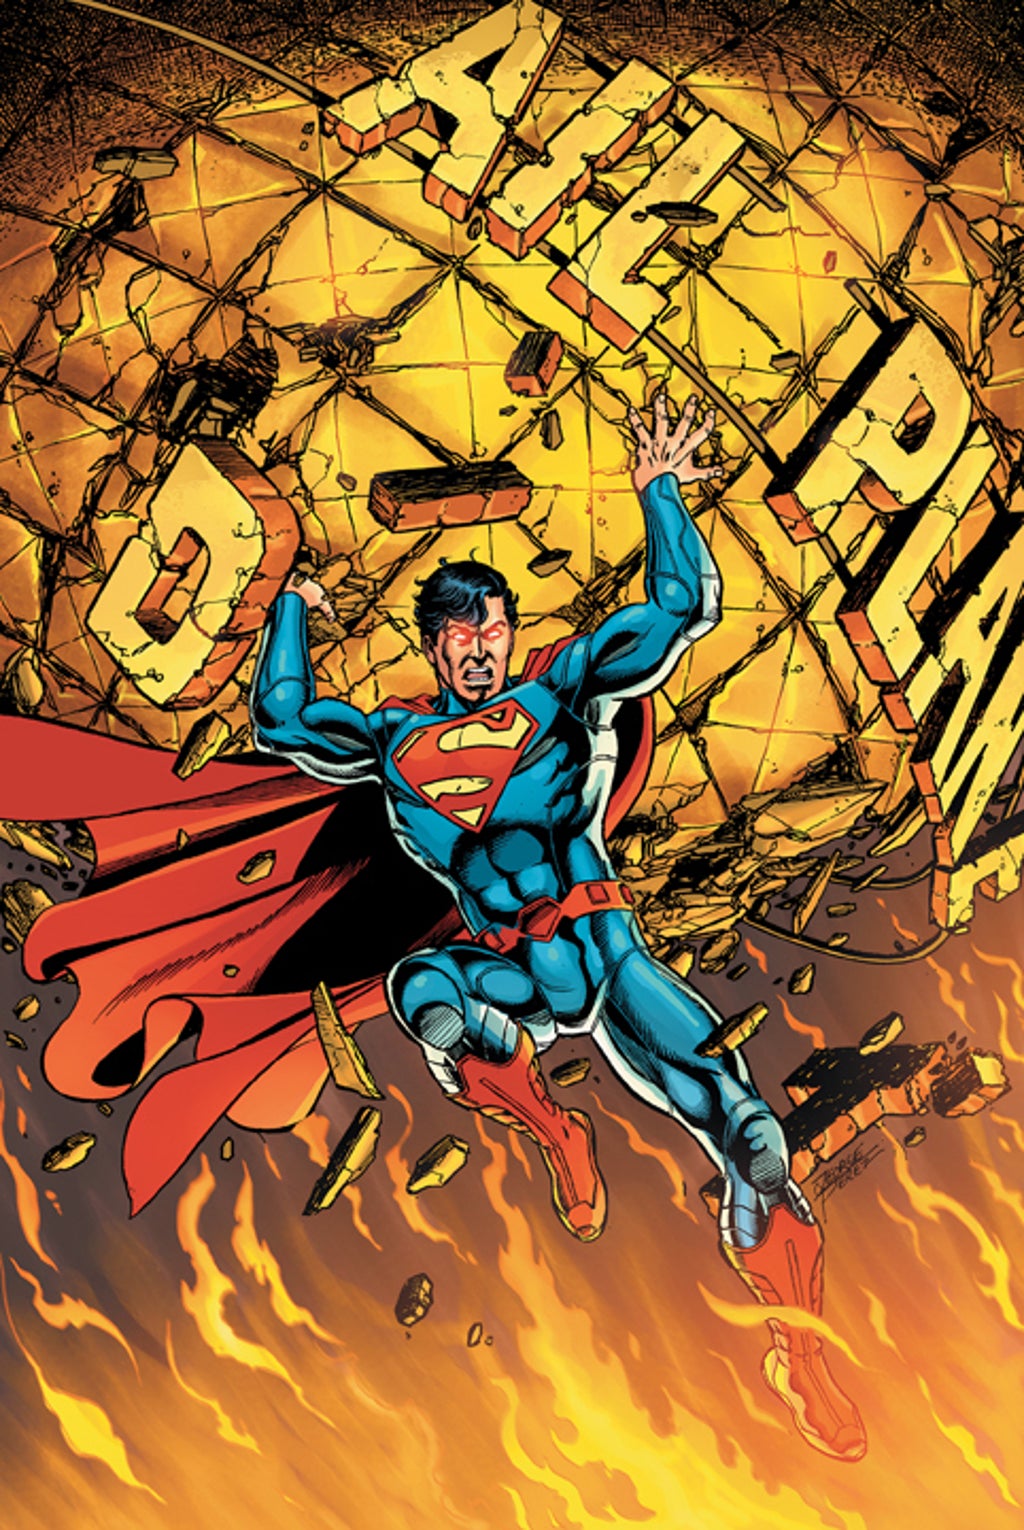 DC’s new Superman comes out as bisexual